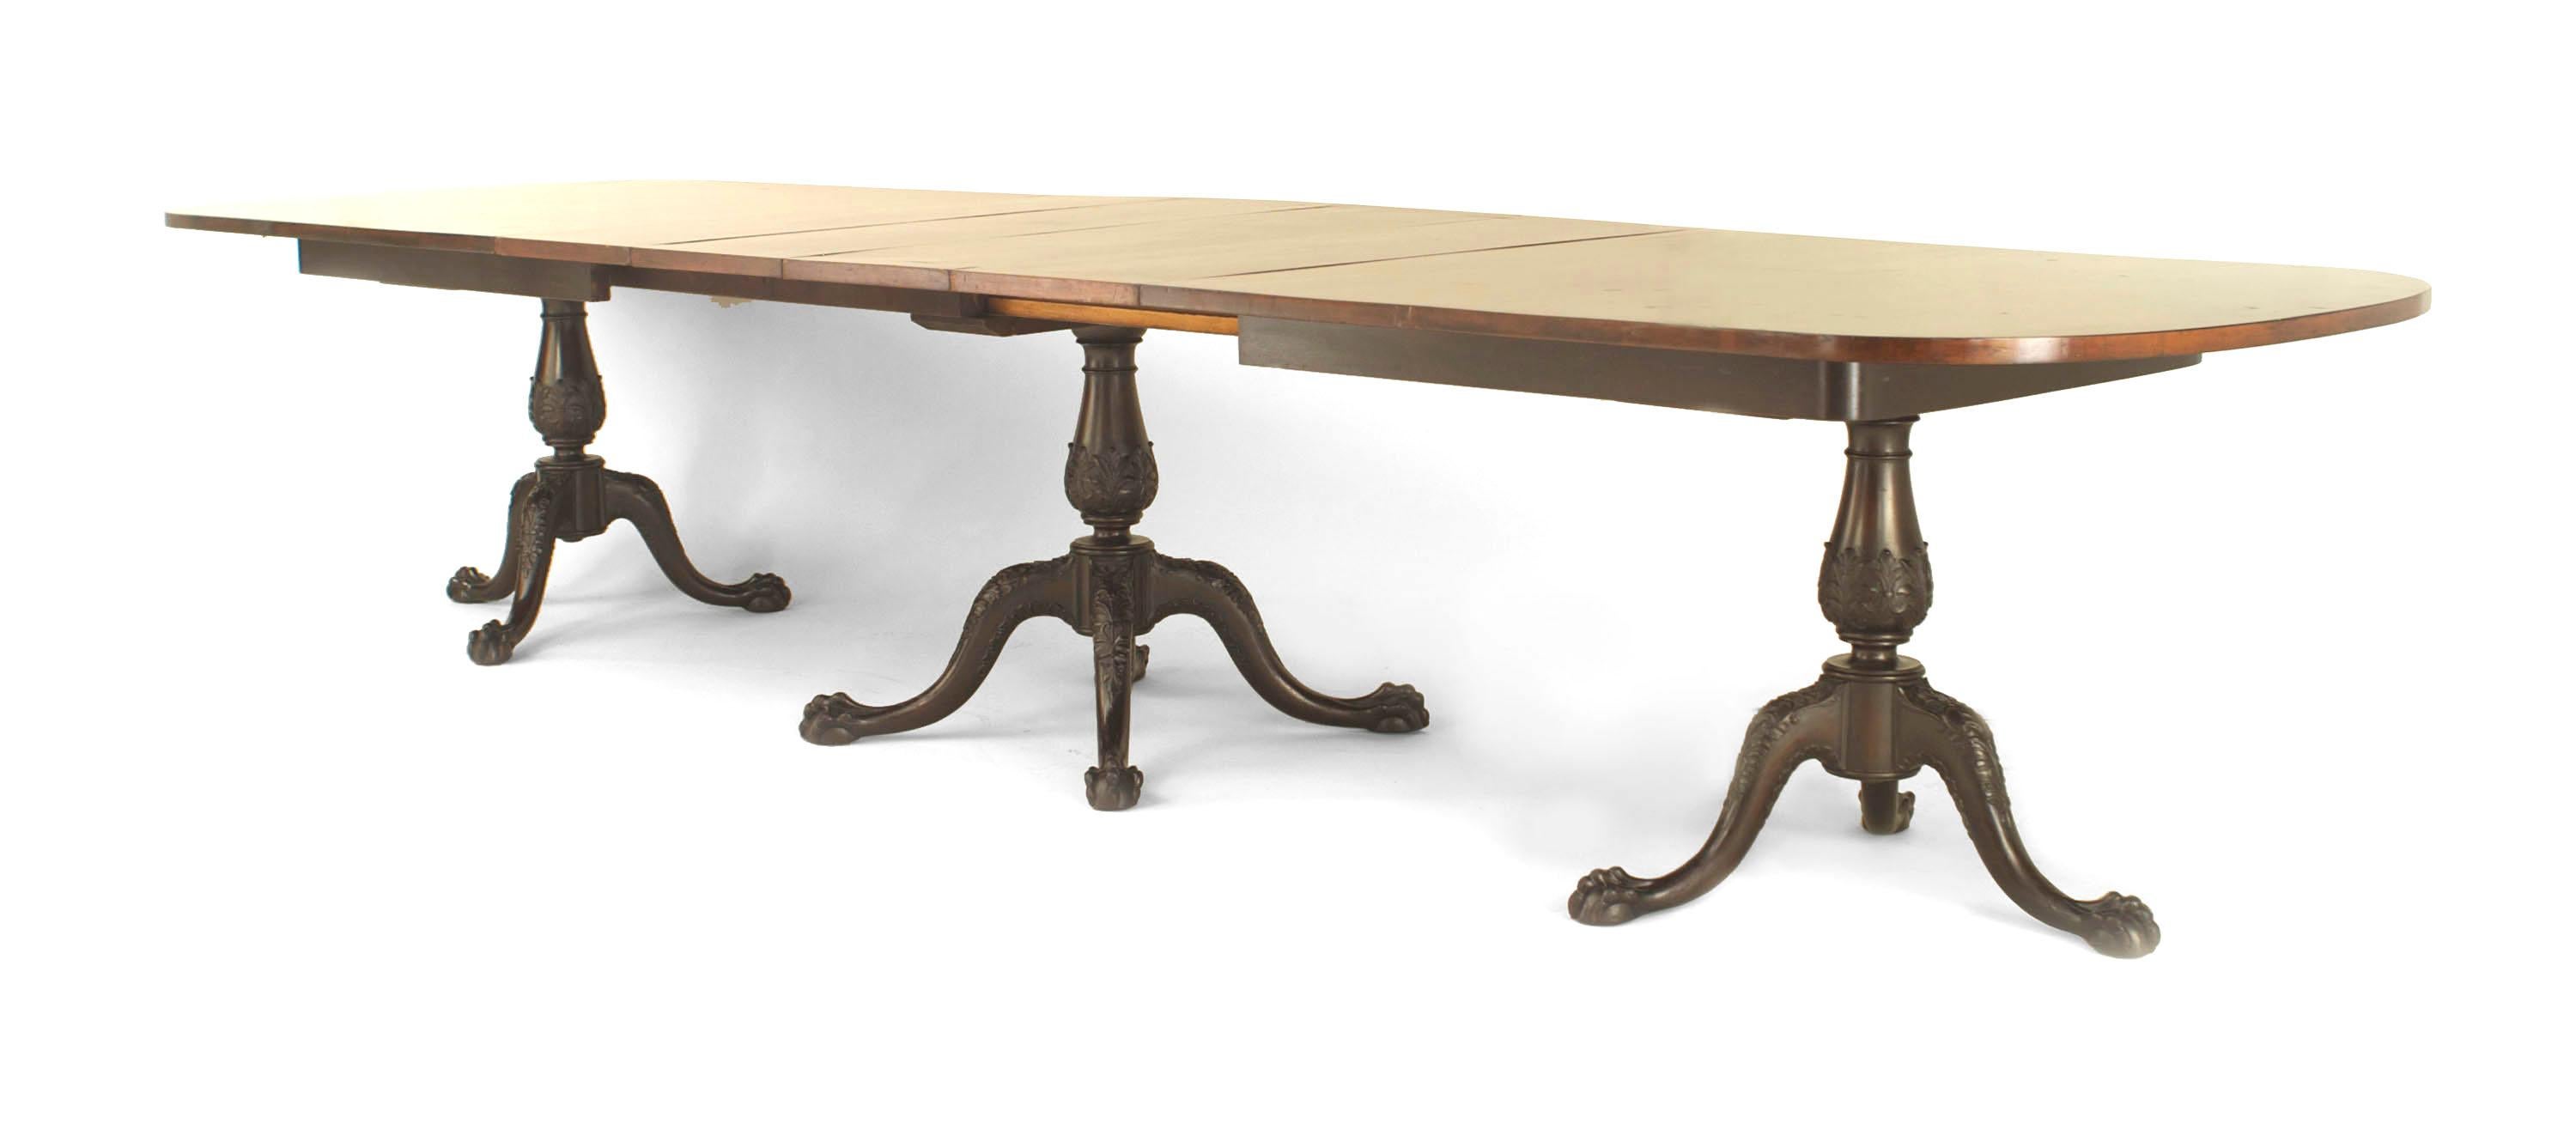 English Chippendale-style (19th Century) mahogany triple pedestal base dining table (4 table leaves - 13.5